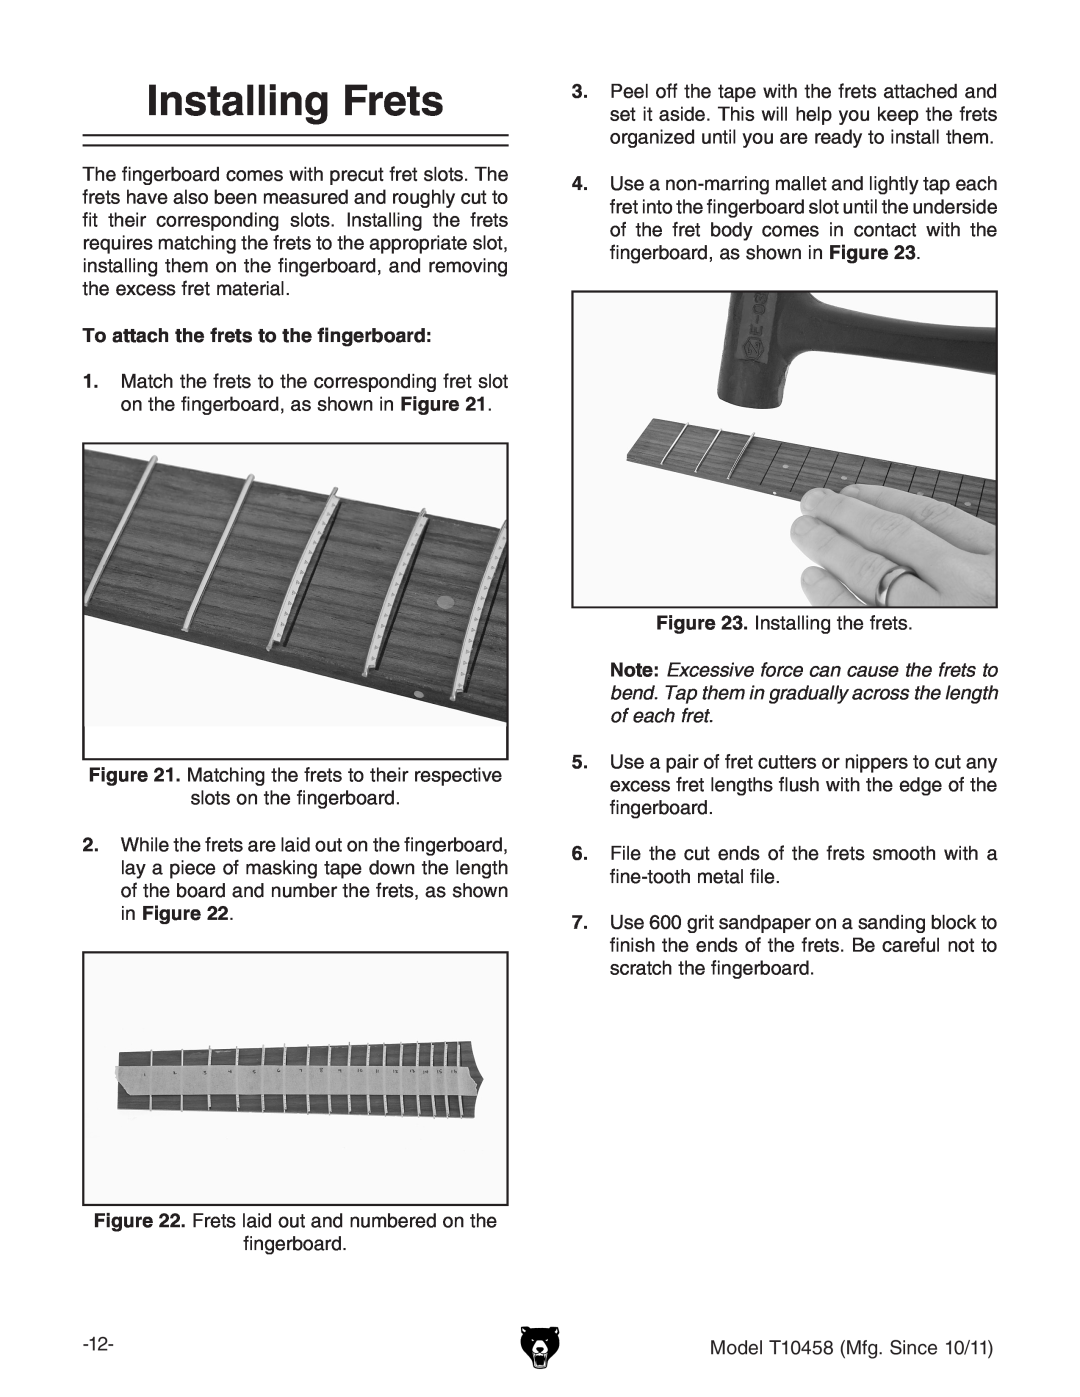 Grizzly T10458 instruction manual Installing Frets, To attach the frets to the fingerboard 